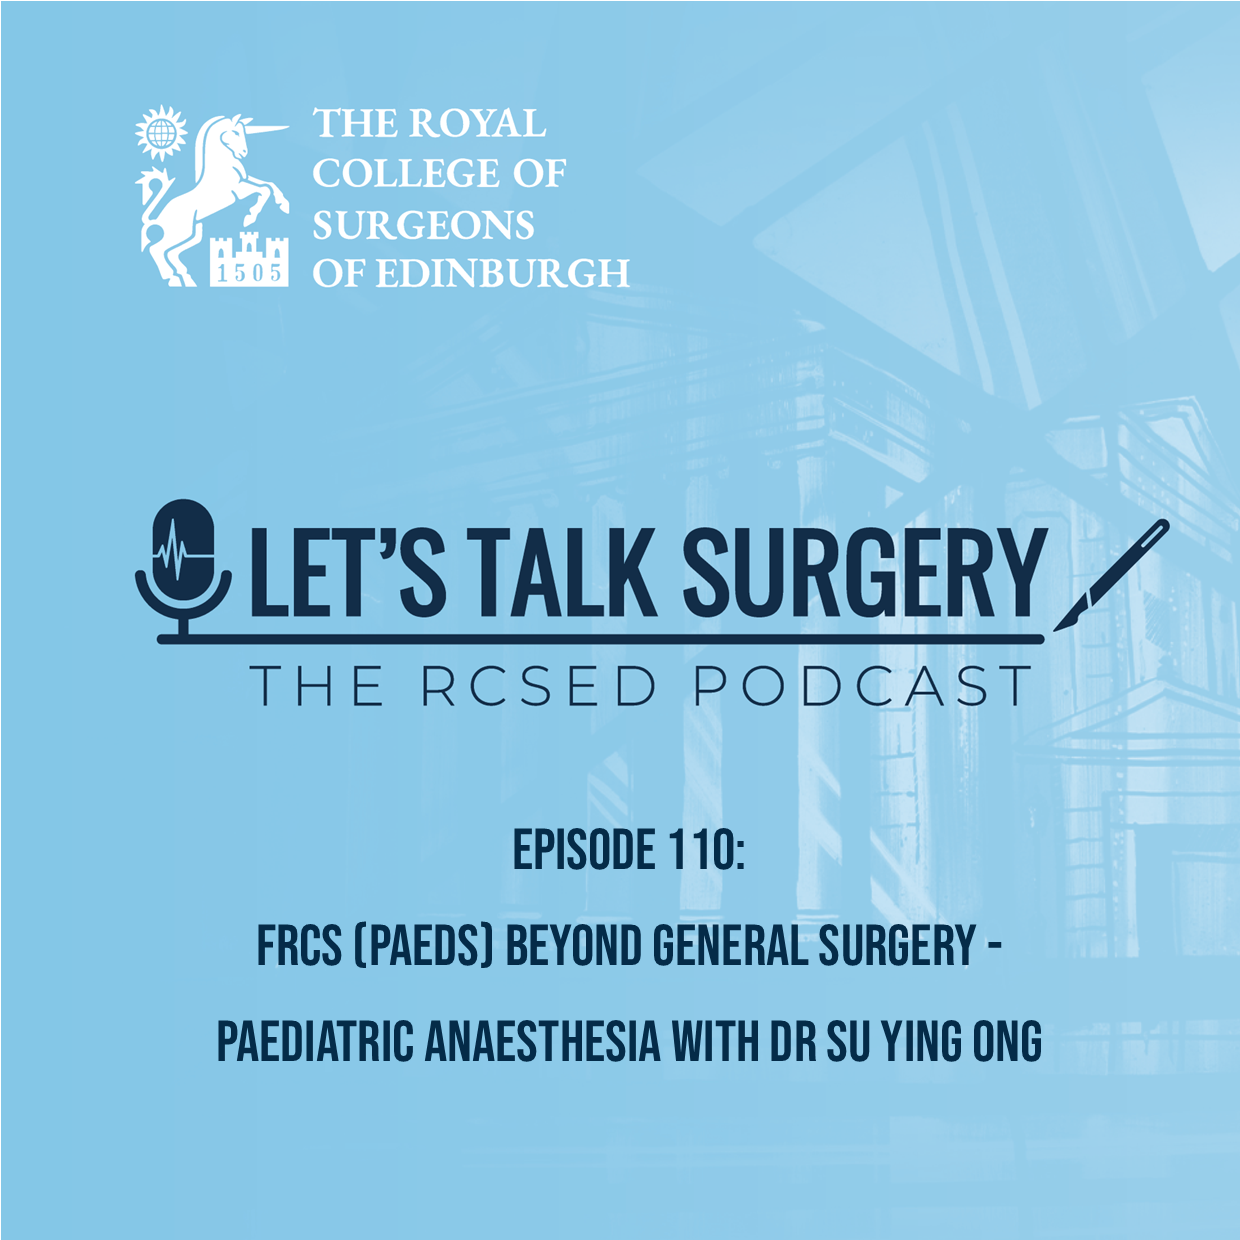 FRCS (Paeds) Beyond General Surgery - Paediatric Anaesthesia with Dr Su Ying Ong